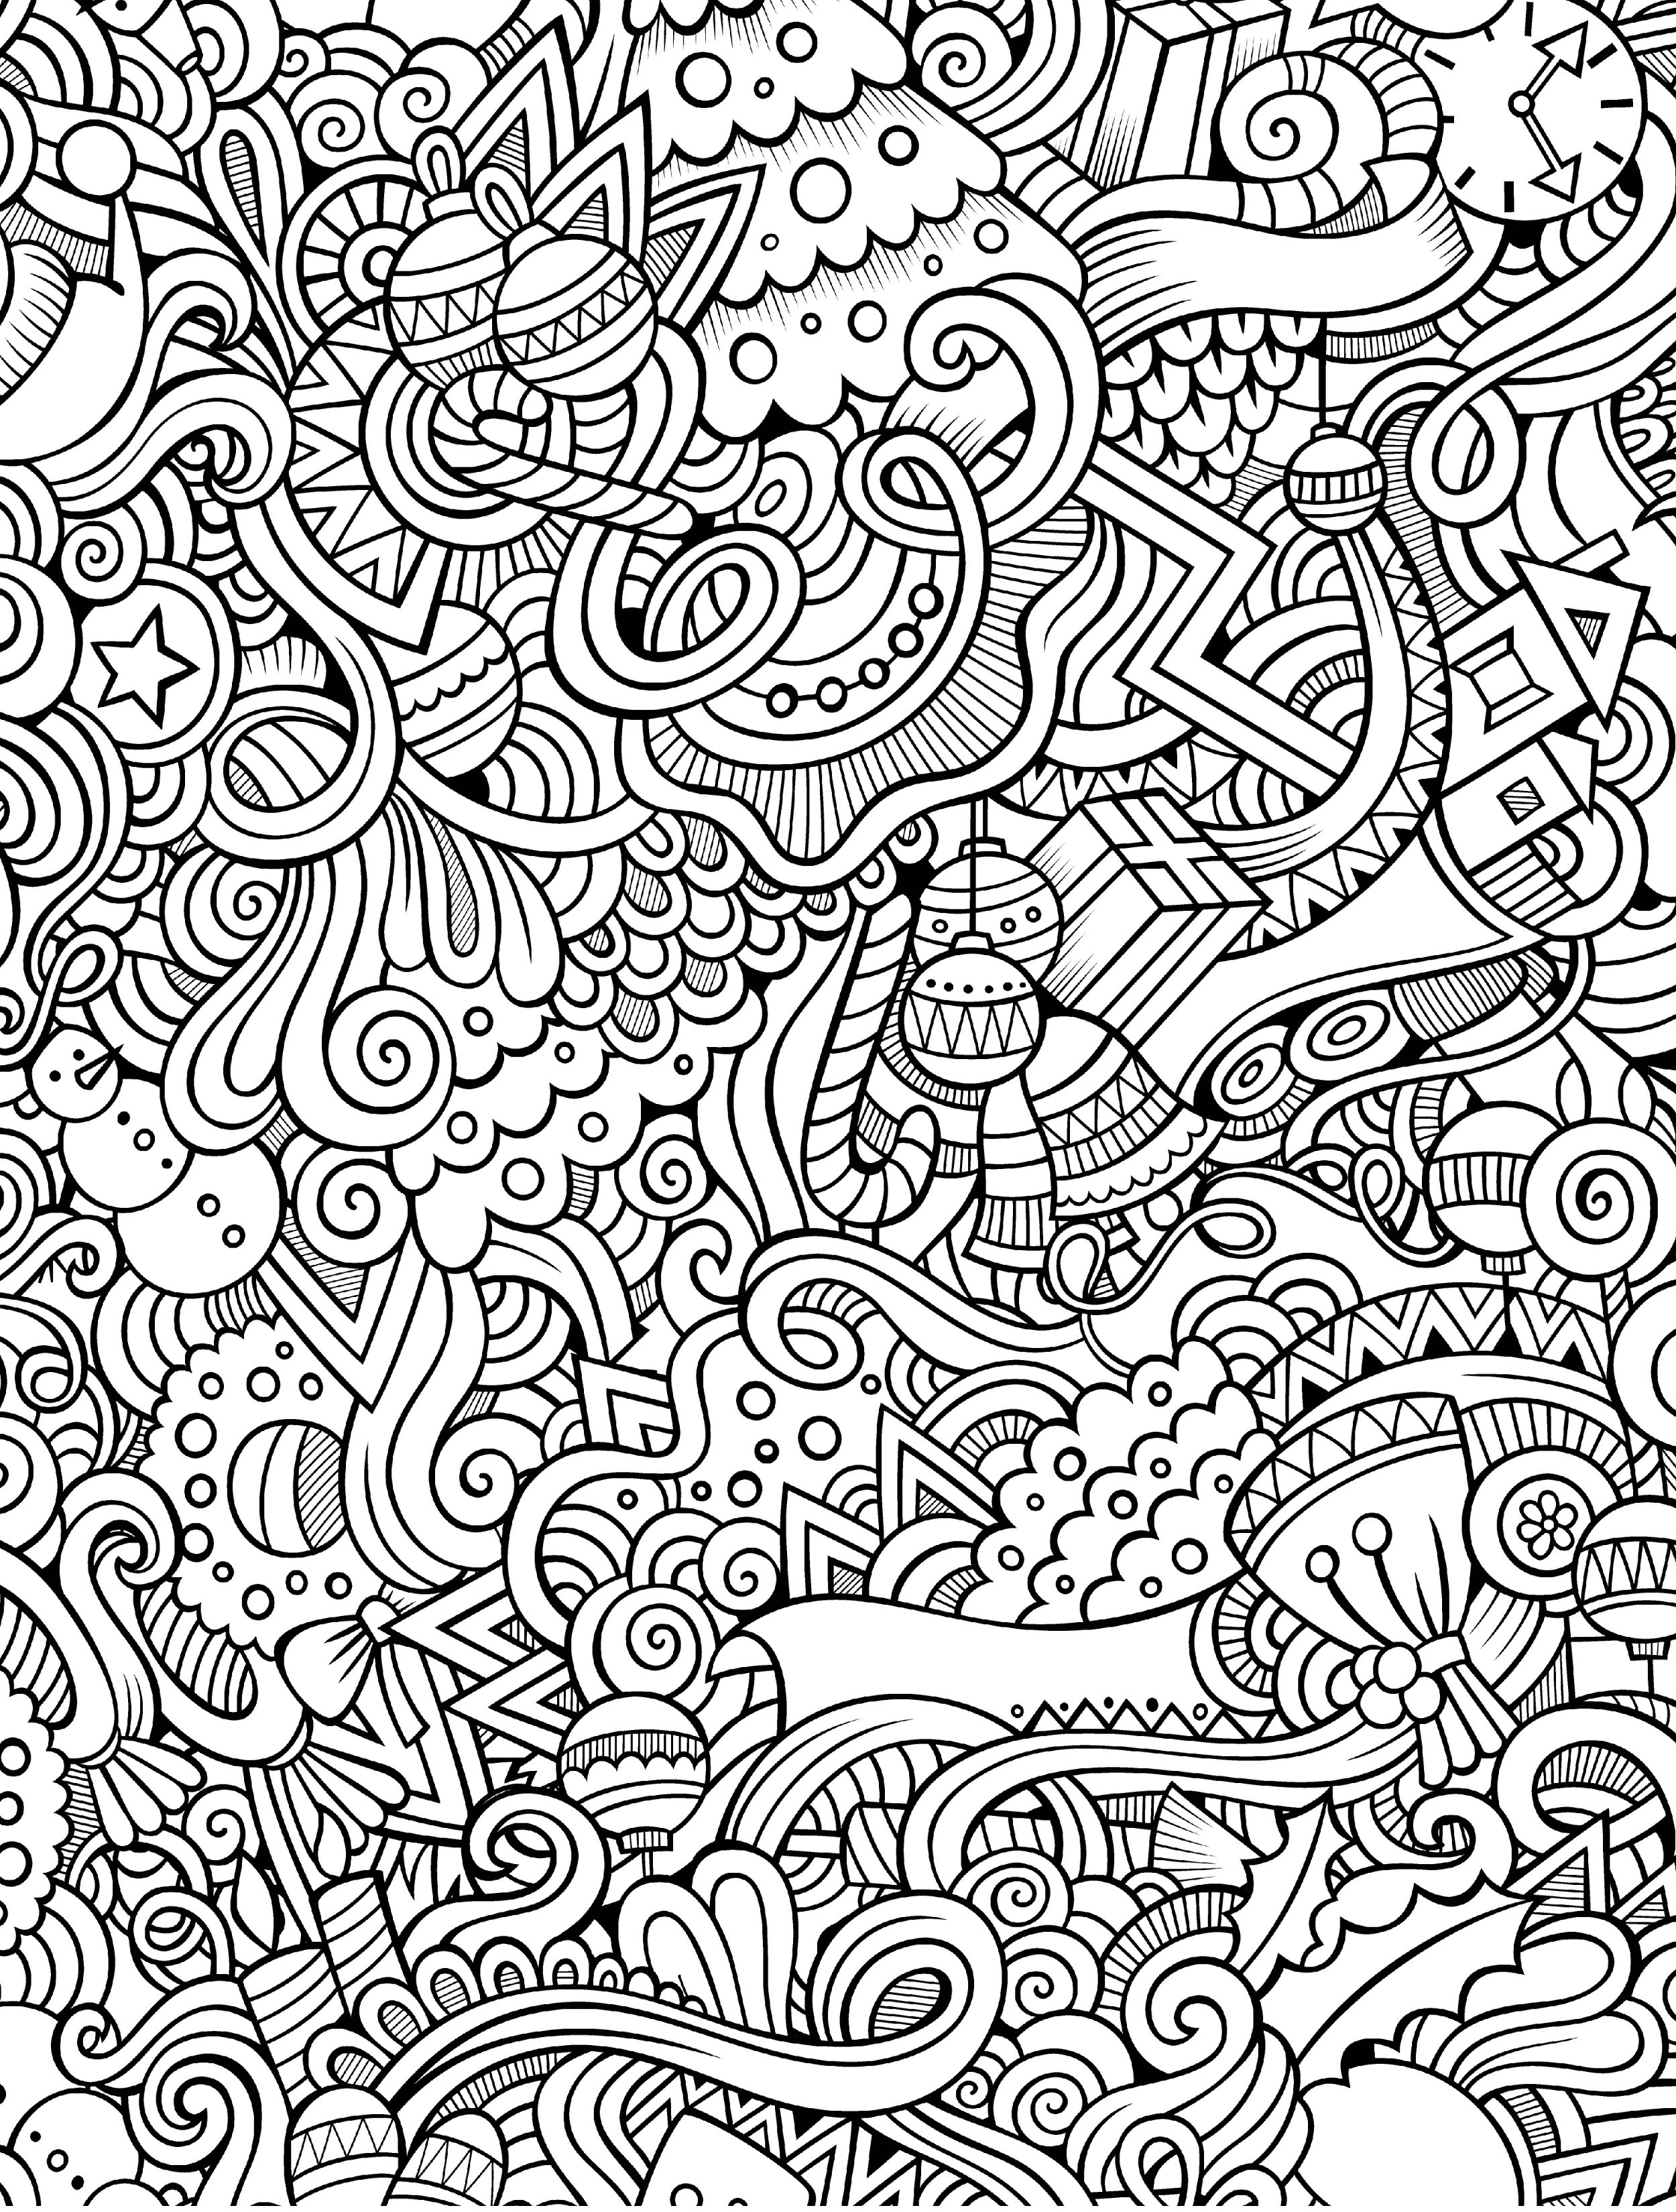 Free Coloring Pages Pdf
 10 Free Printable Holiday Adult Coloring Pages